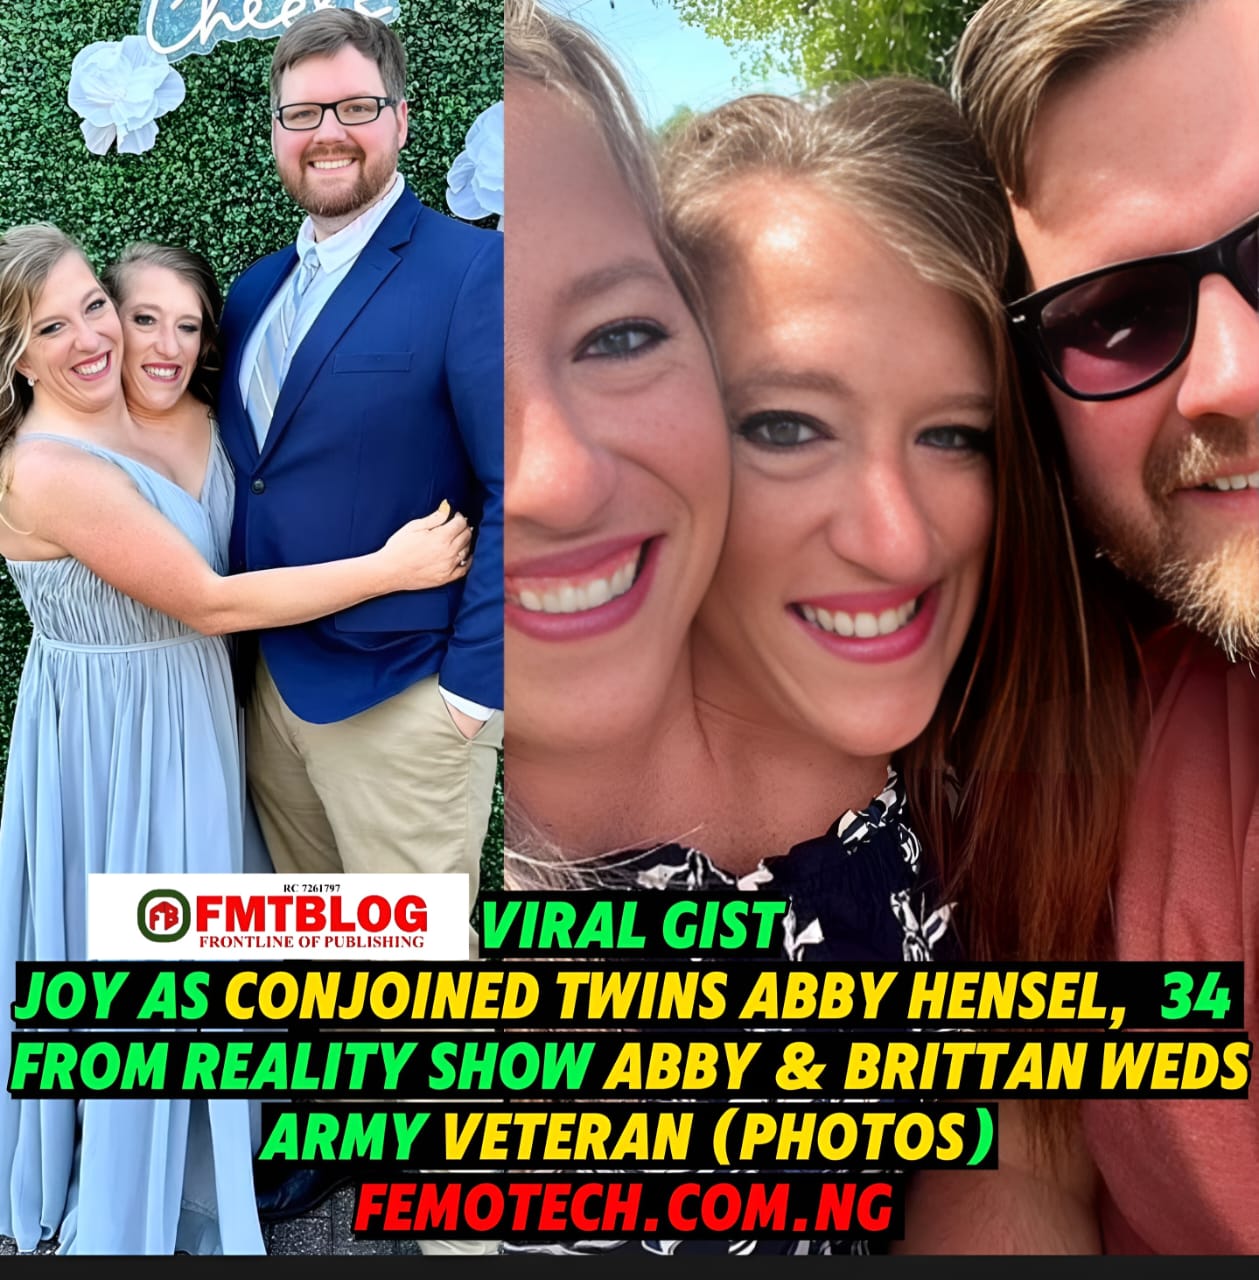 Joy As Conjoined Twins Abby Hensel, 34 From Reality Show Abby & Brittany Weds Army Veteran(PHOTOS)